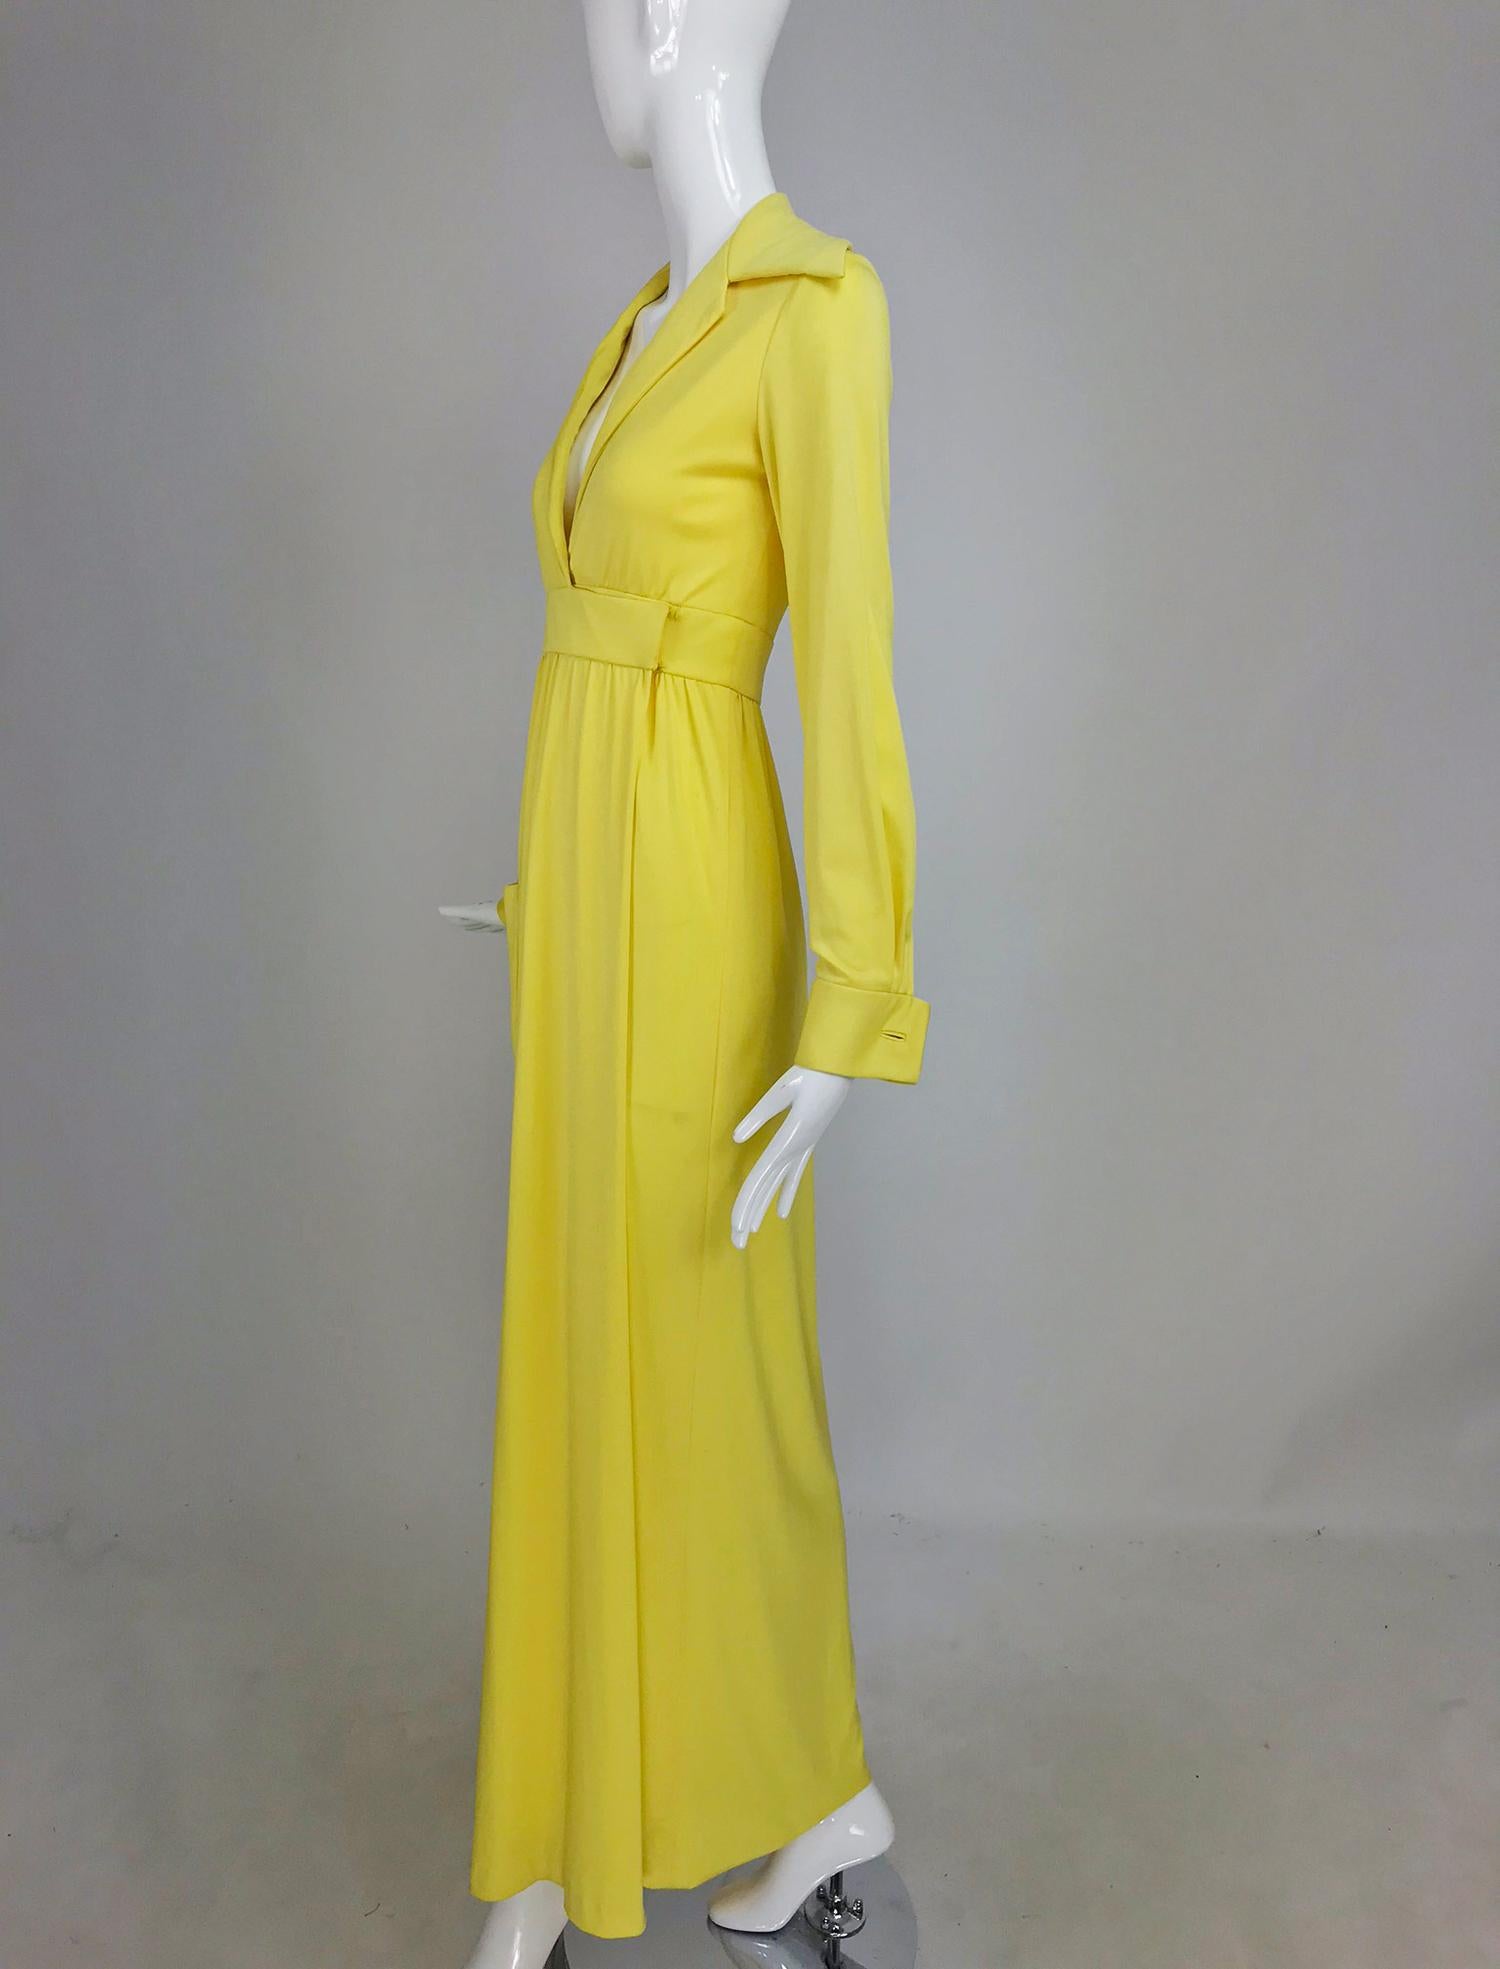 Victoria Royal/Lillie Rubin yellow jersey plunge wrap maxi dress from the 1970s. This dress was made by Victoria Royal Hong Kong and retailed at Lillie Rubin. Sunny yellow silky knit jersey wrap dress. Plunge neckline with a wide lapel collar, long